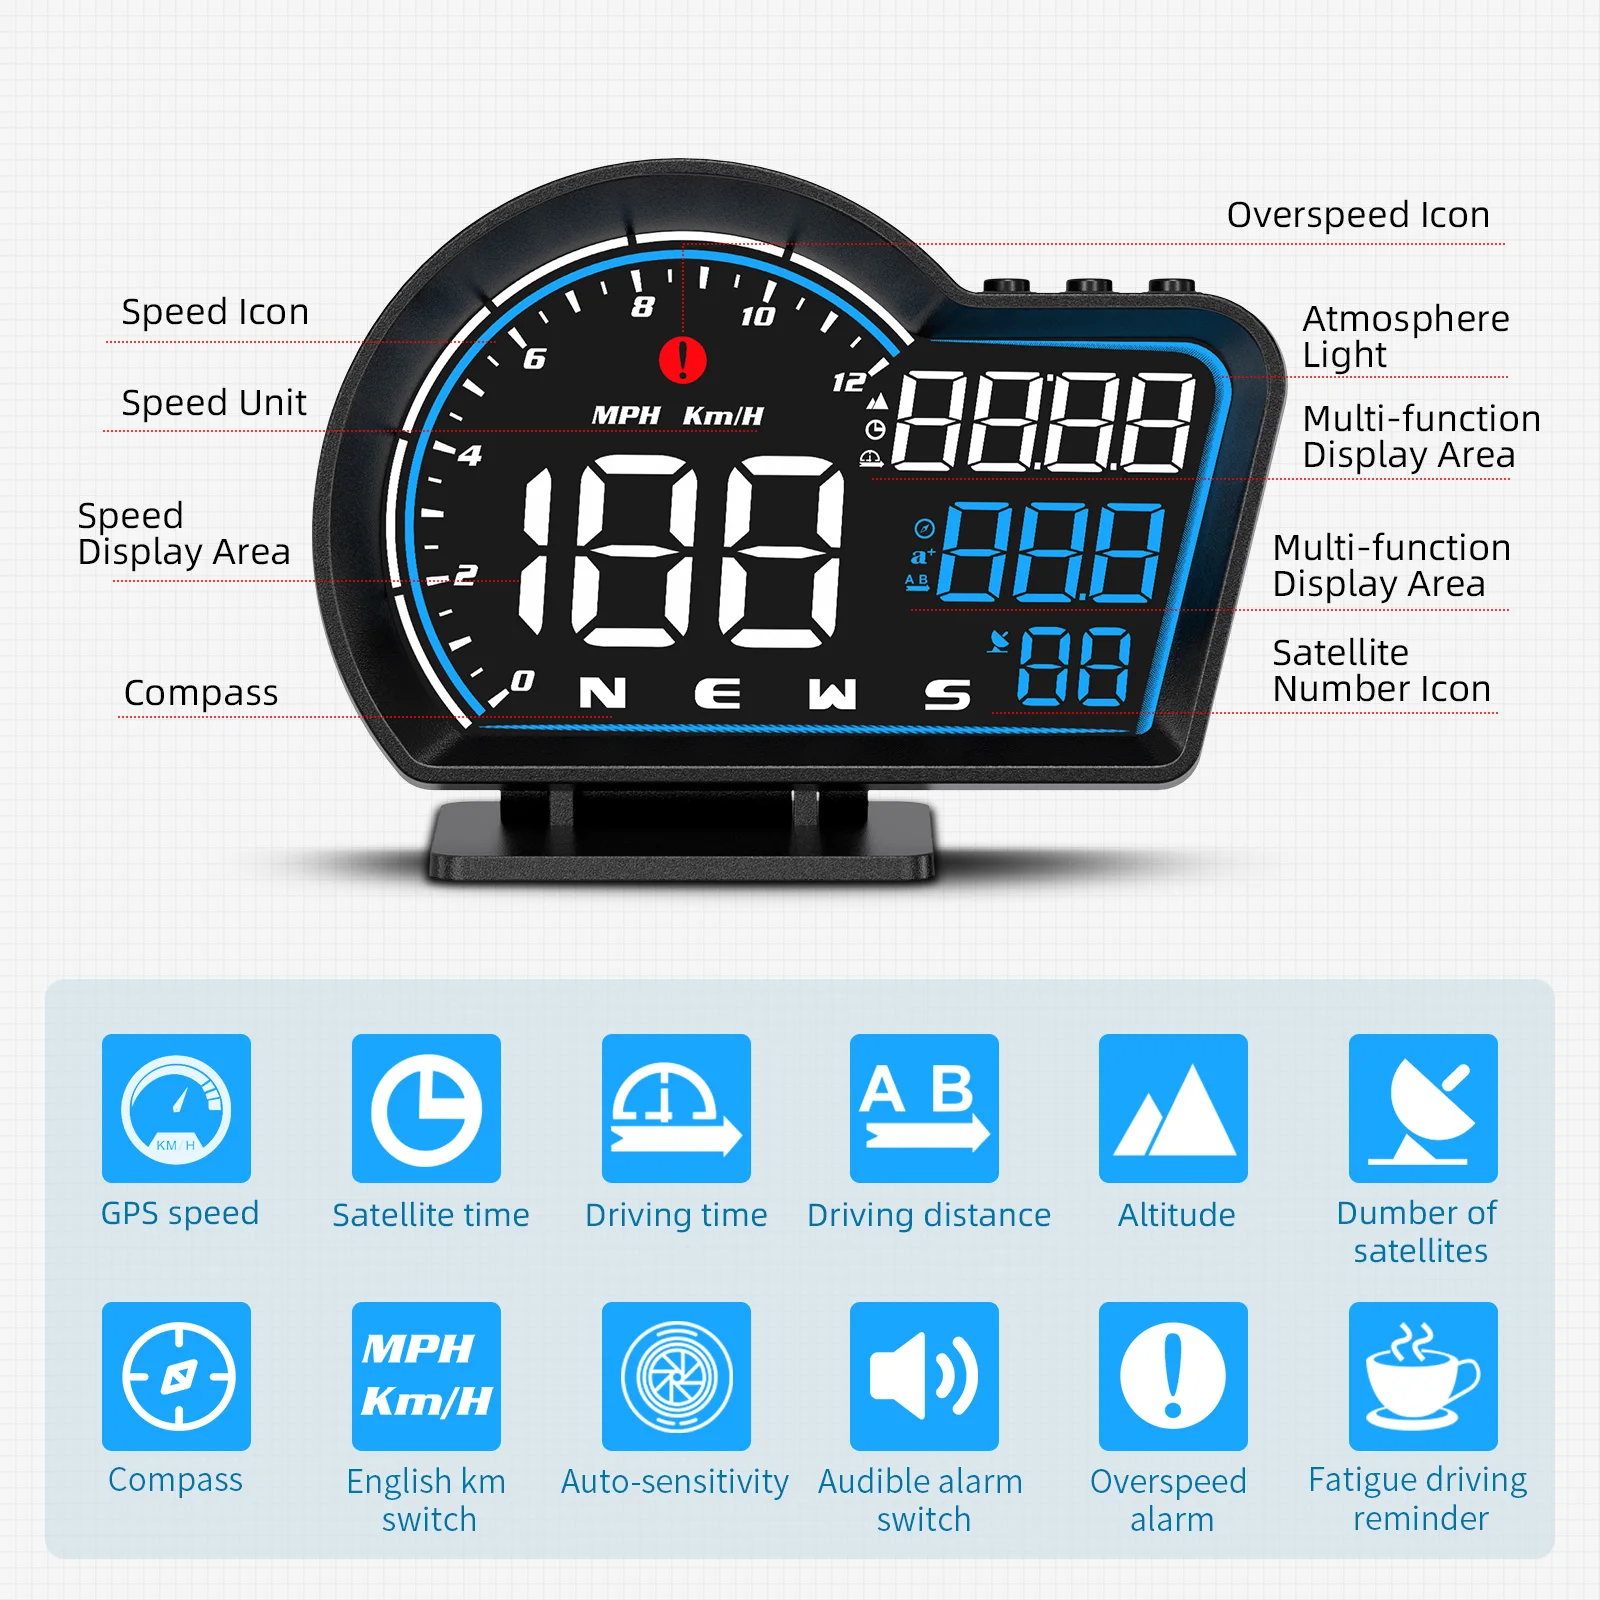  Qfansi GPS Digital Speedometer Car Head Up Display HUD Odometer  Overspeed Alarm Universal with Speed MPH, Compass Direction, Clock,  Altitude, Fatigue Driving Reminder : Electronics